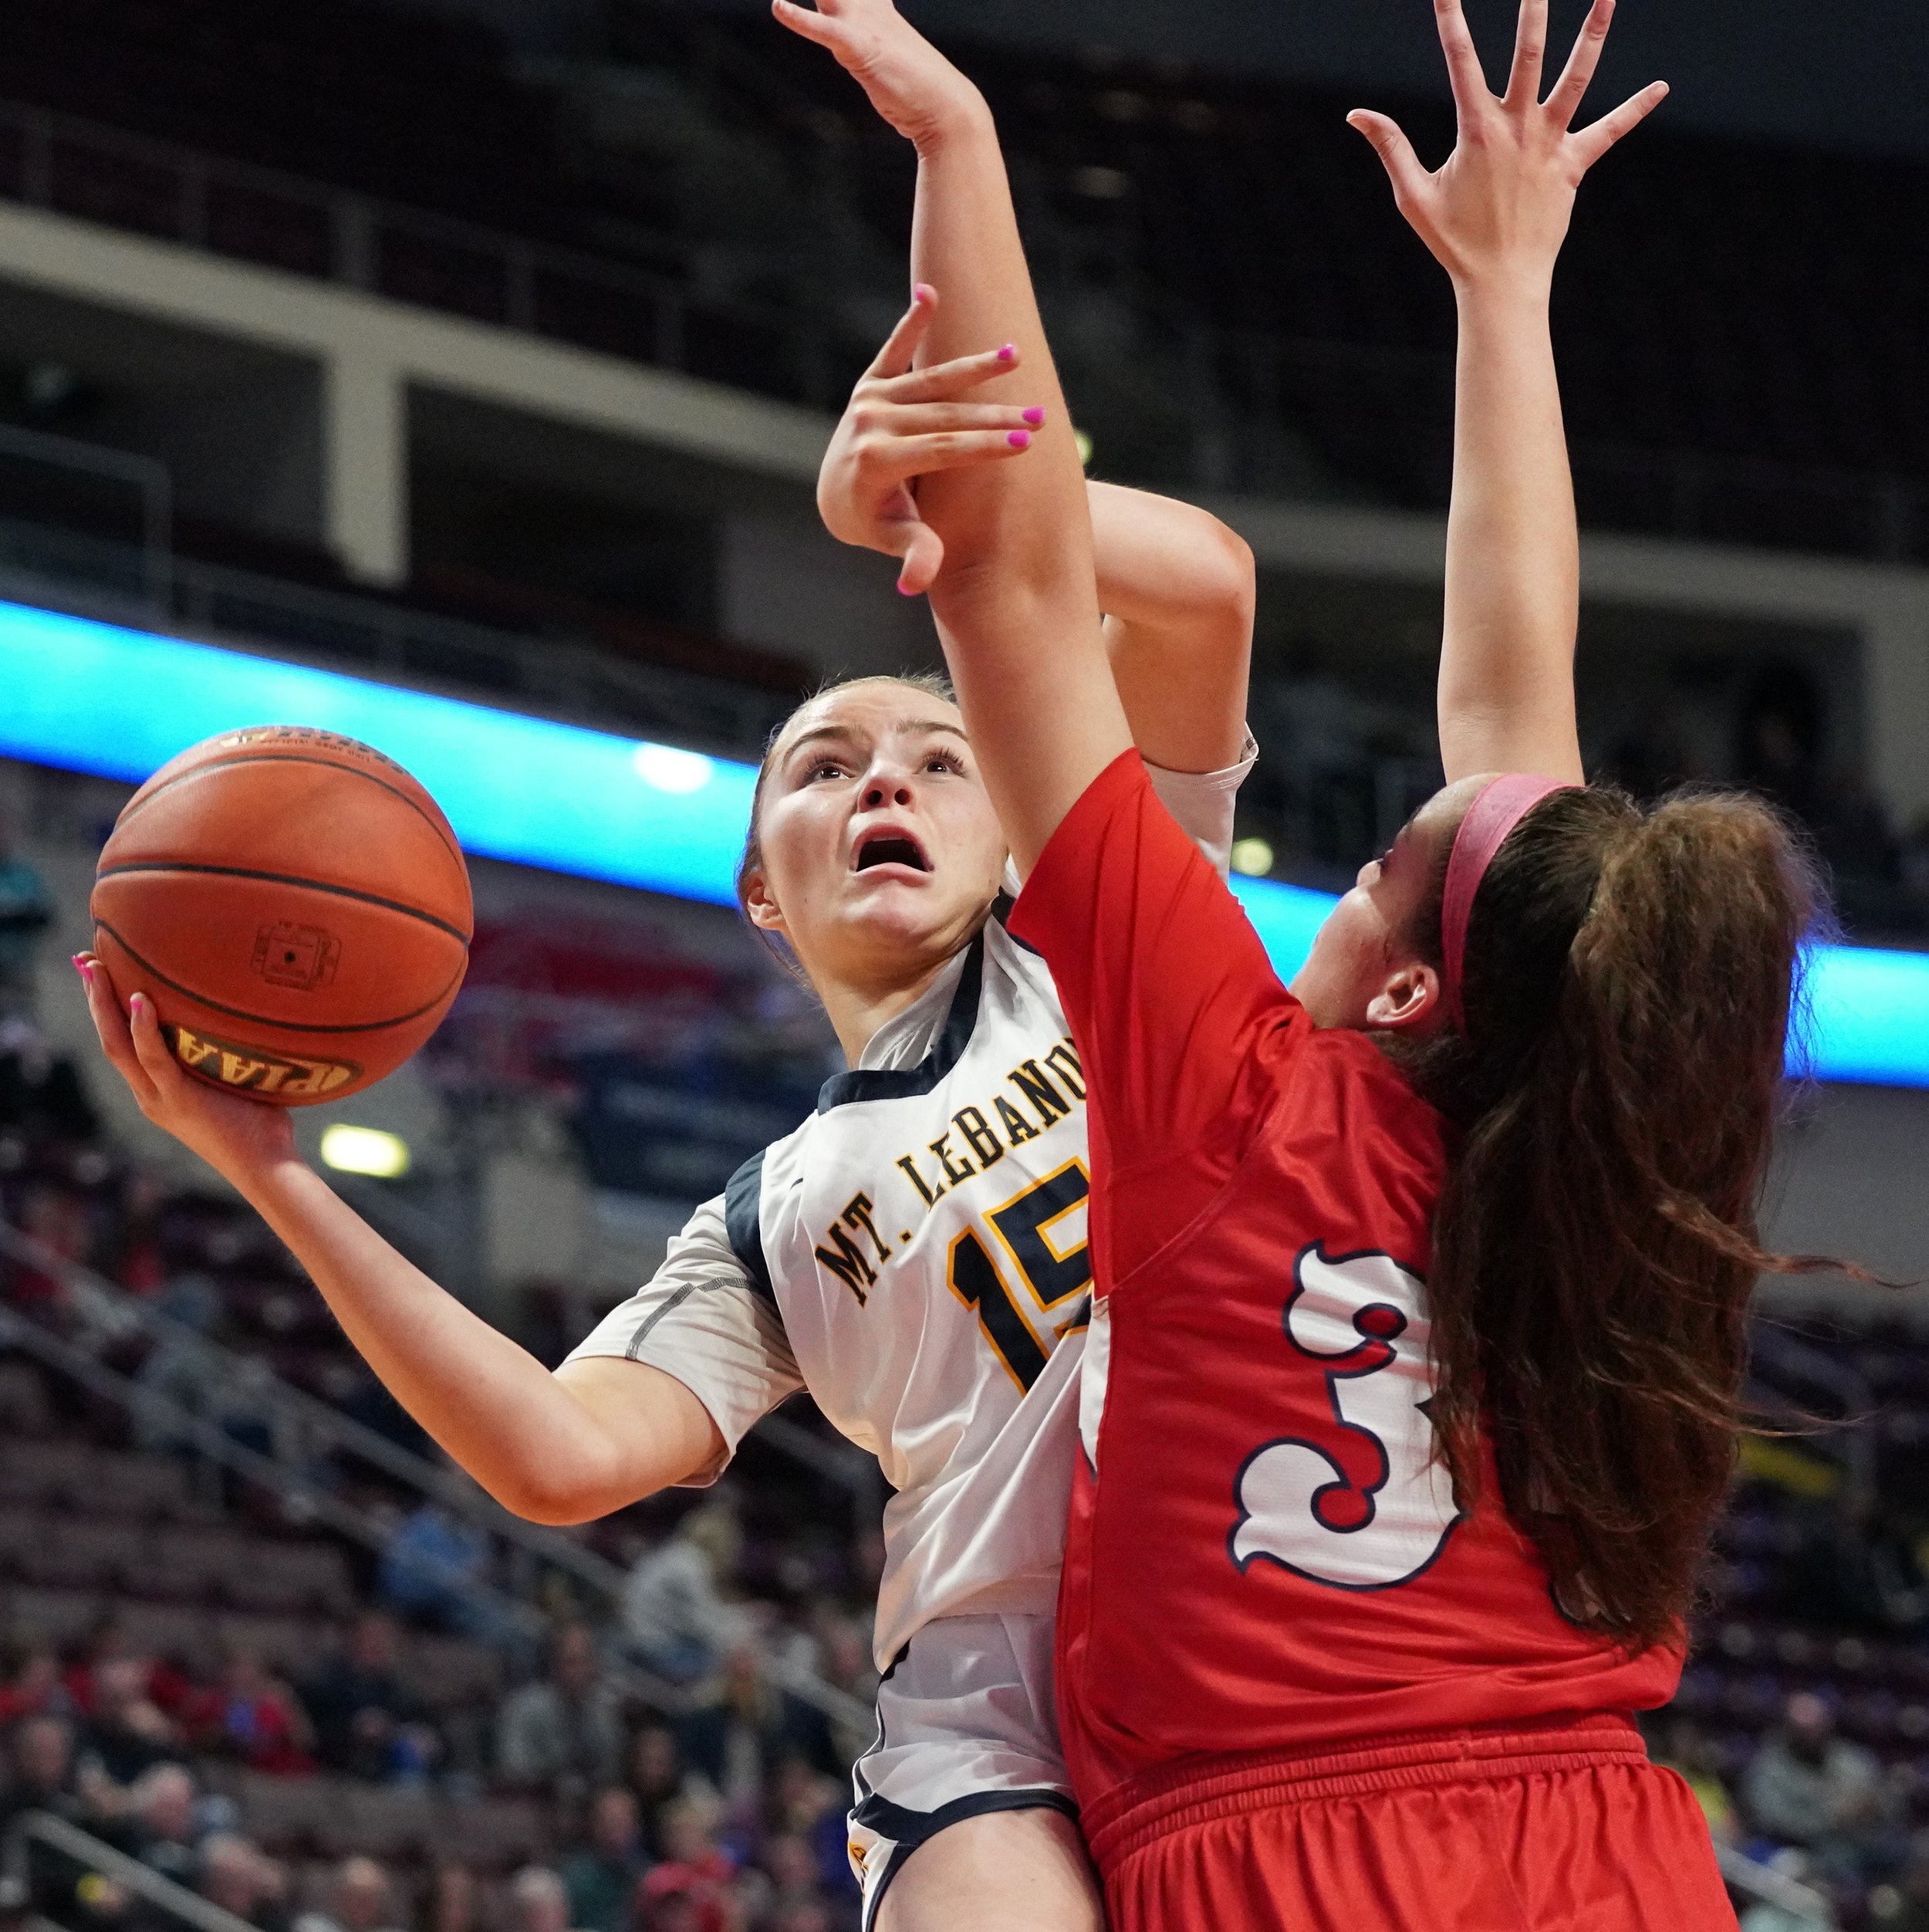  Mt. Lebanon’s Ashleigh Connor tries to get the ball around Plymouth-Whitemarsh’s Jordyn Thomas in the PIAA class 6A girls basketball championship on Saturday, March 26, 2022, at Giant Center in Hershey, Pa. Mt. Lebanon lost 60-40. (Emily Matthews/Po